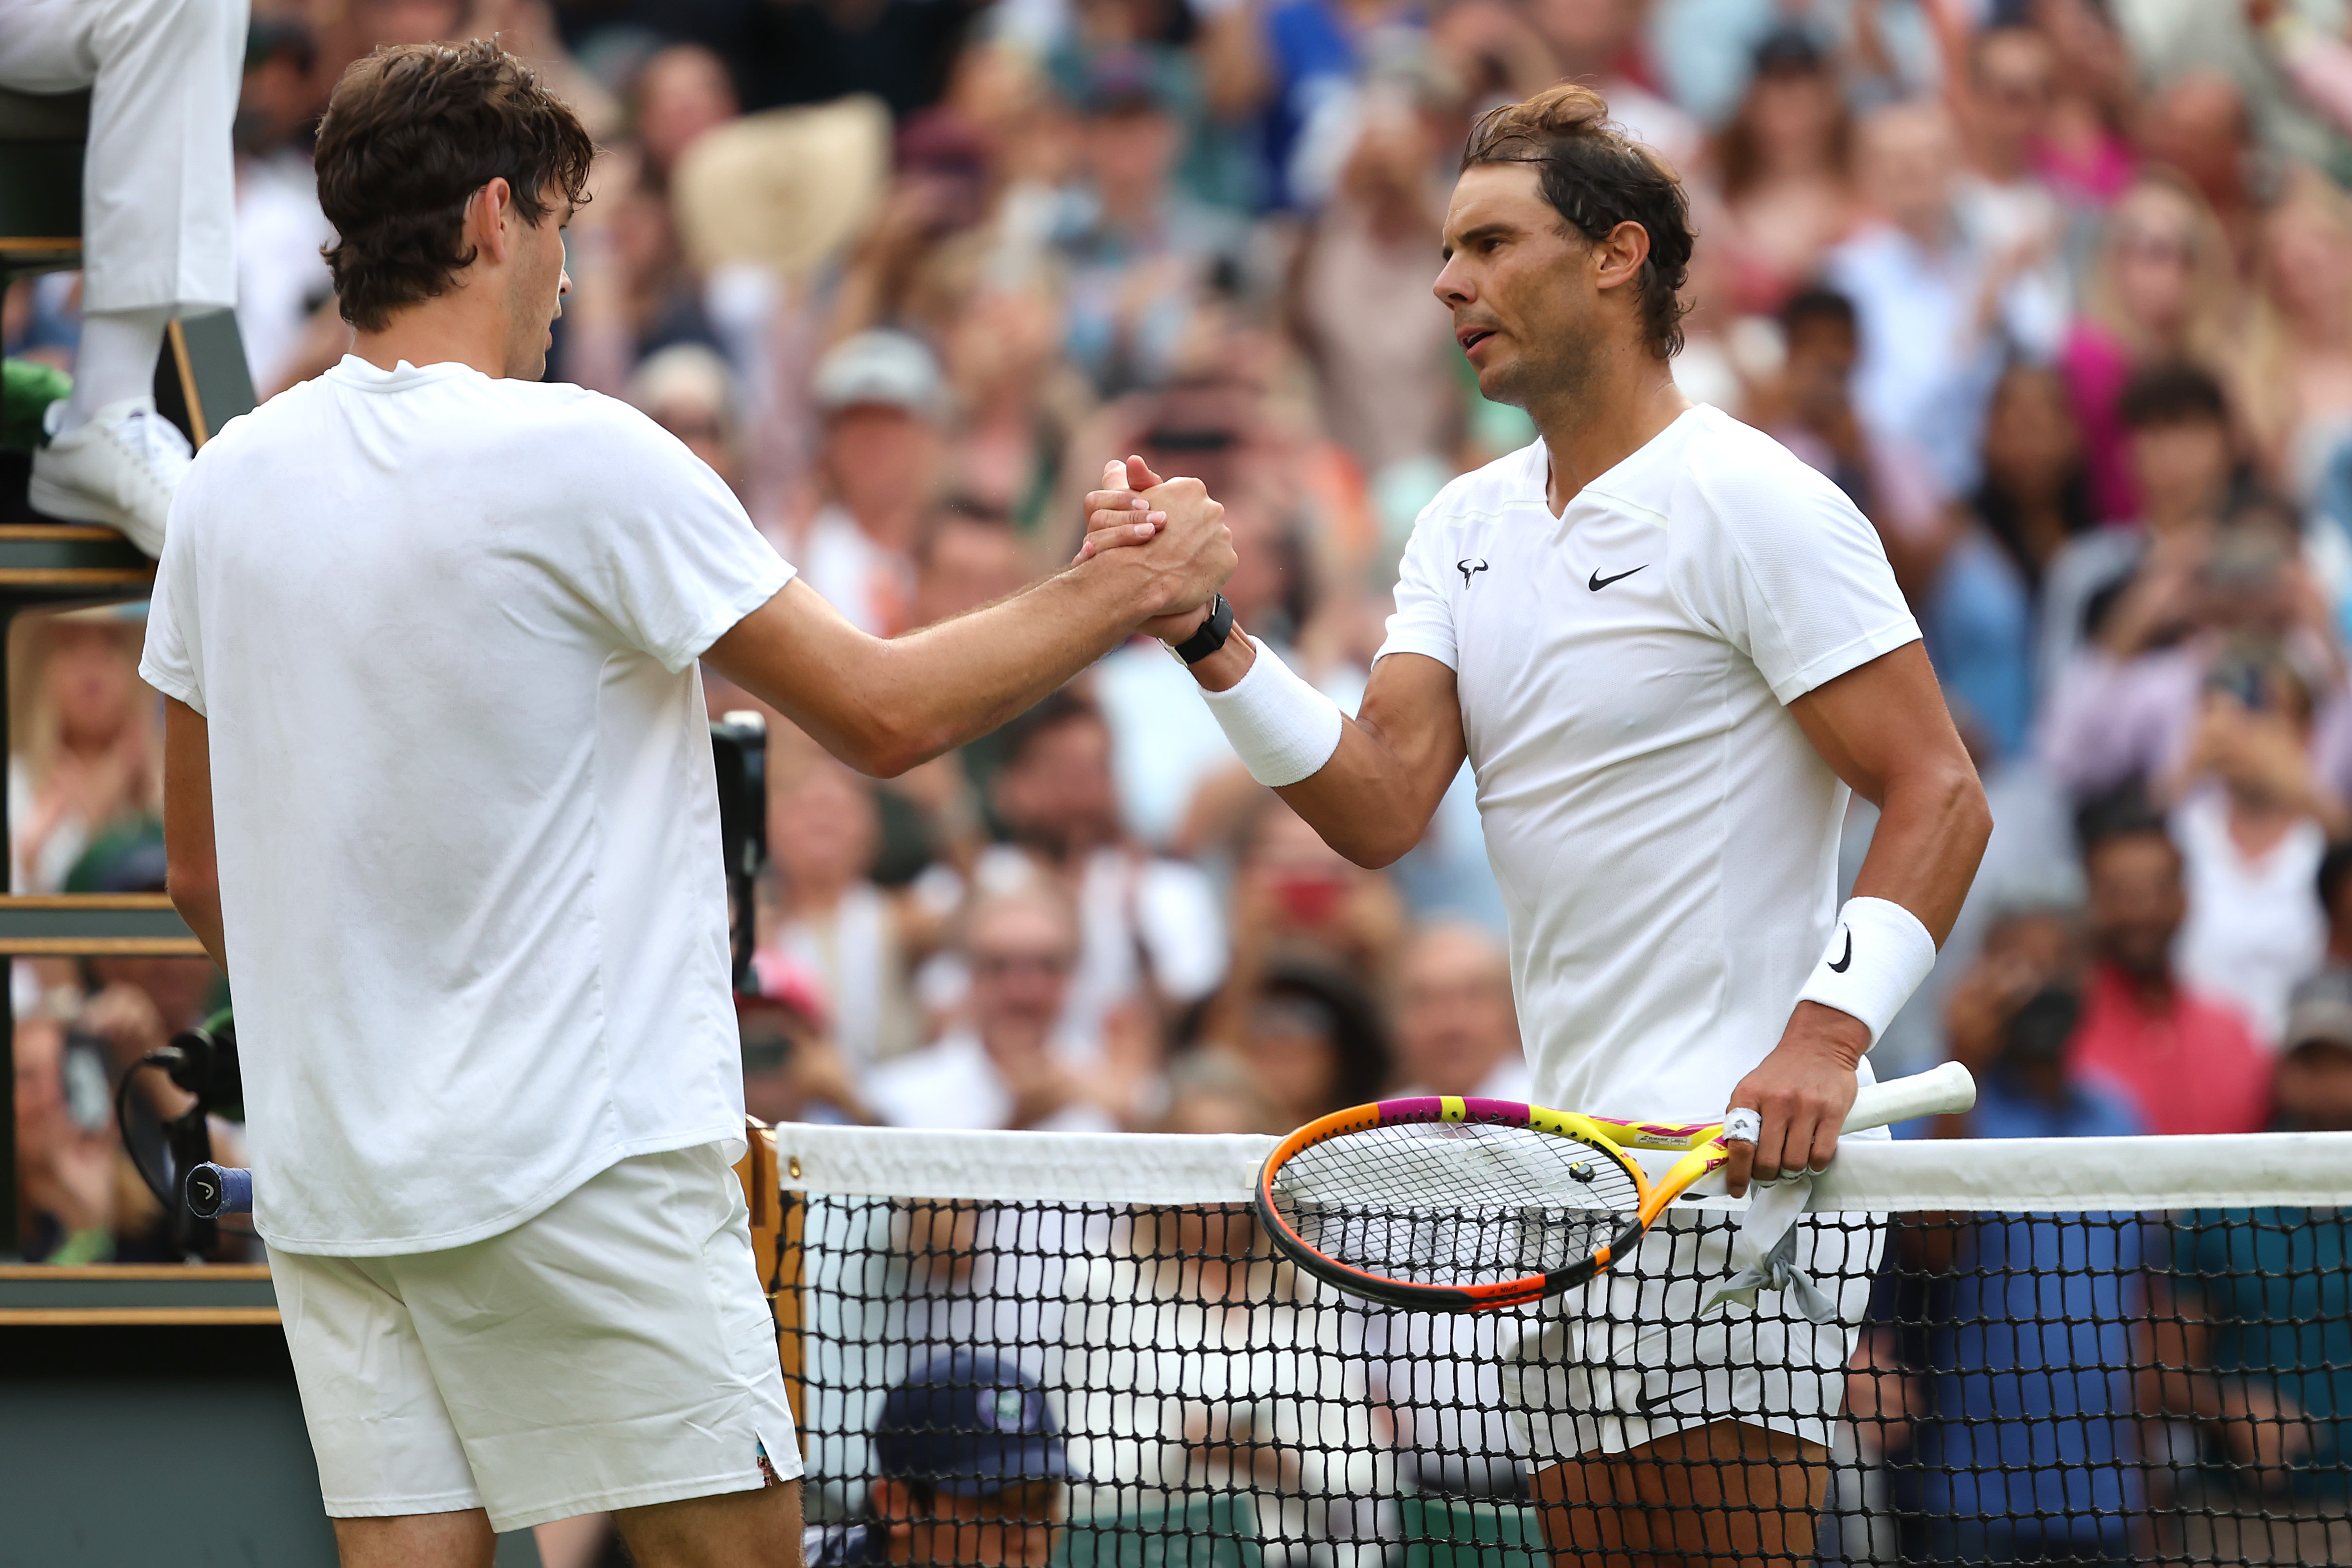 Rafael Nadal clinches decisive tiebreaker to edge Taylor Fritz in Wimbledon quarterfinals and maintain perfect 2022 major record